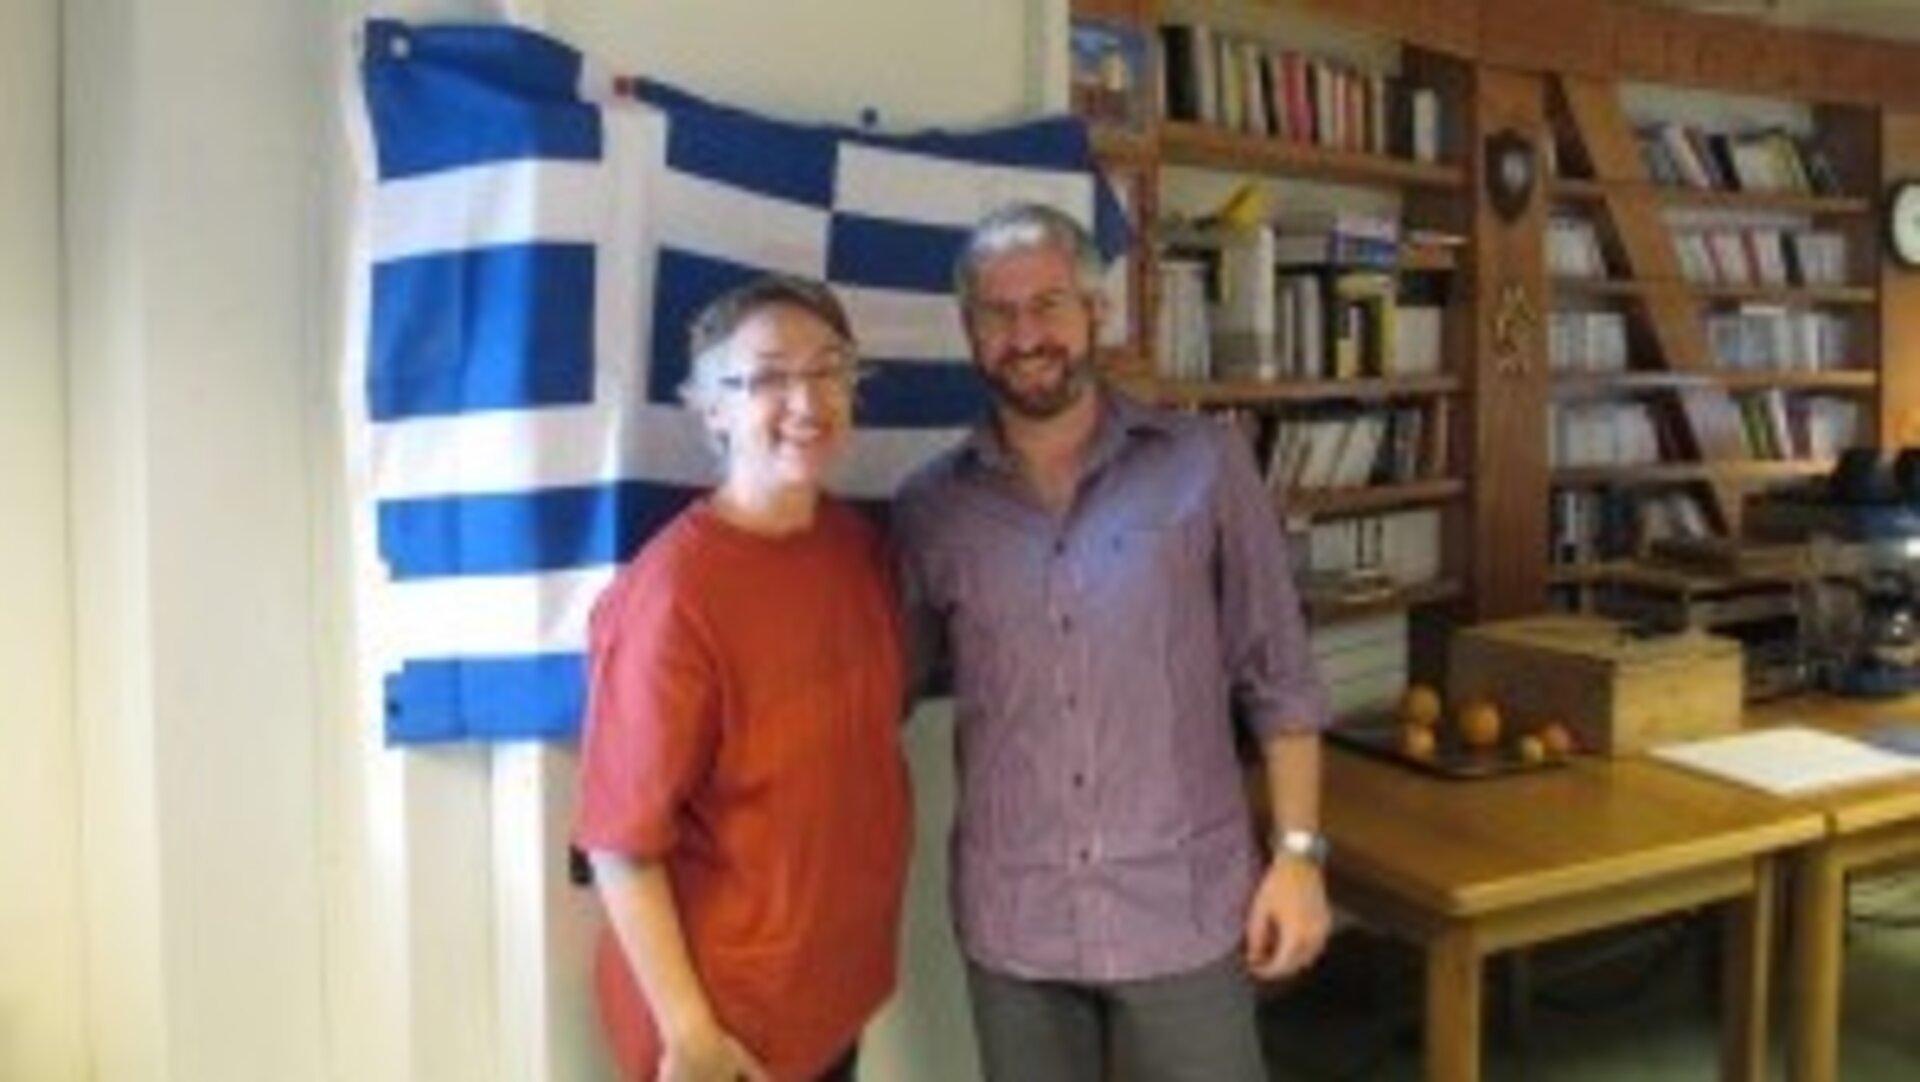 Kaimakamis at Concordia on the greek national day